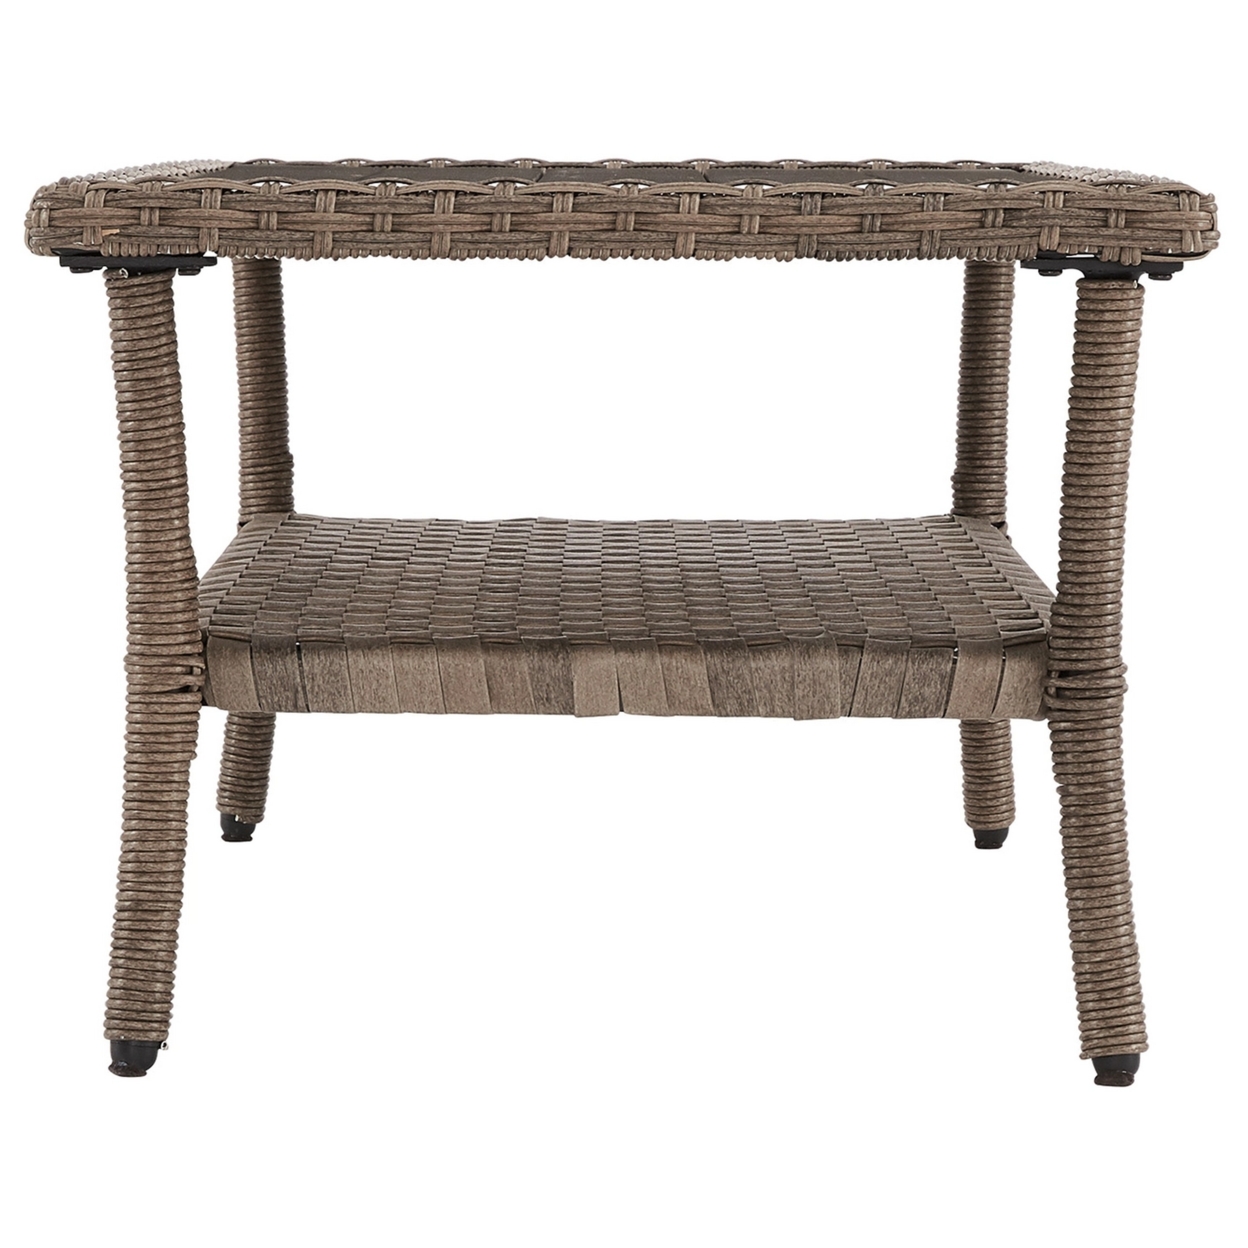 Cocktail Table With Woven Resin Top, Gray- Saltoro Sherpi